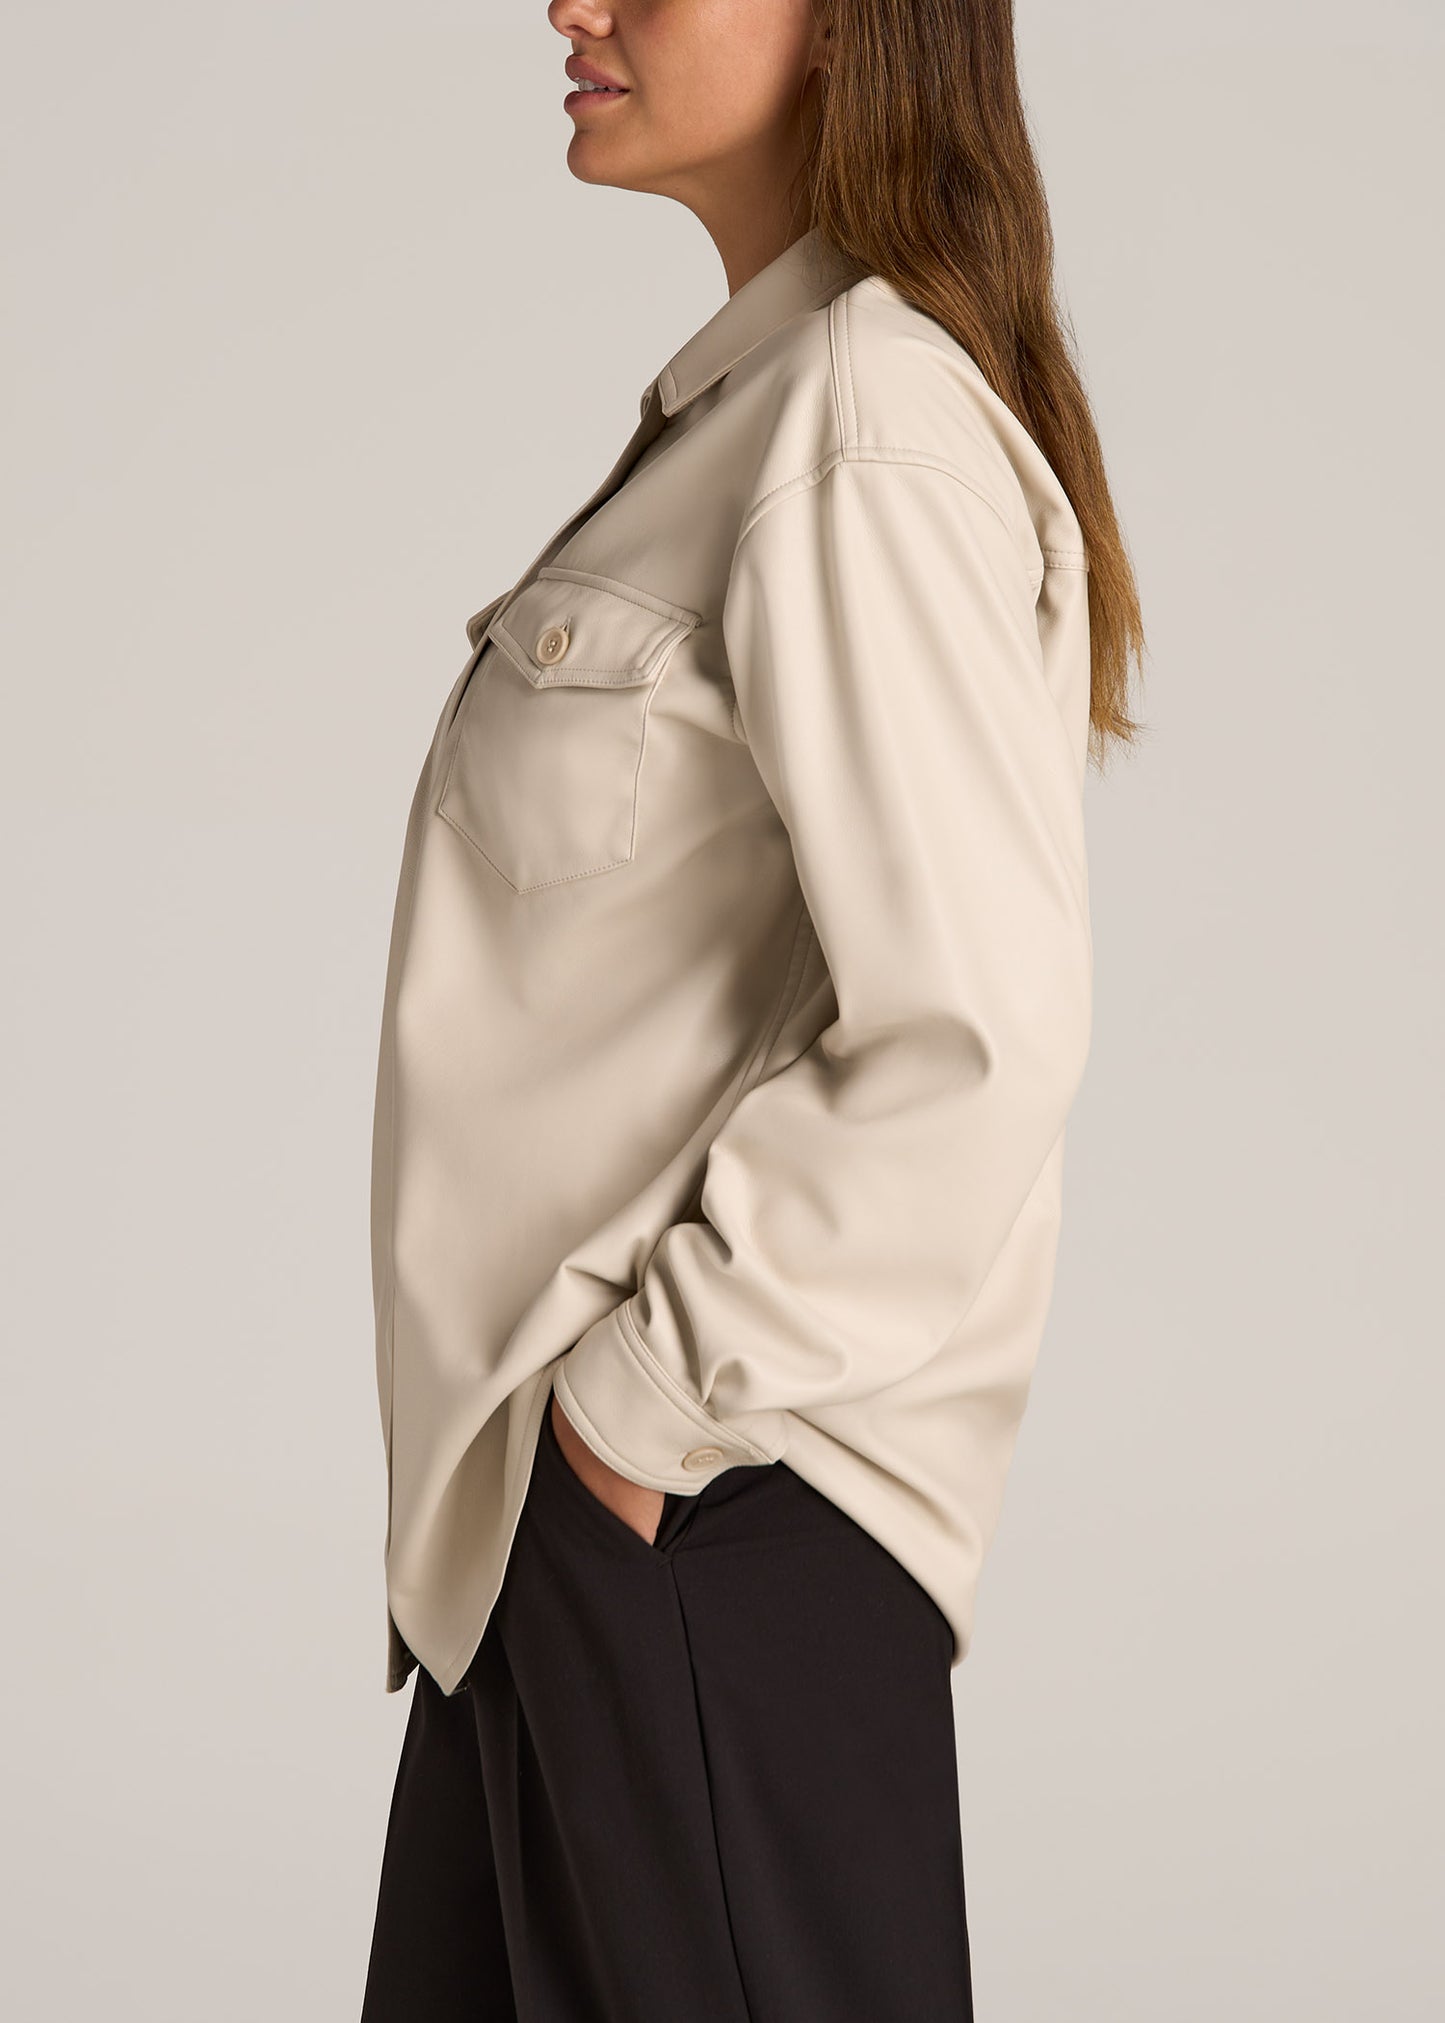 Faux Leather Shirt Jacket for Tall Women in Vanilla Latte